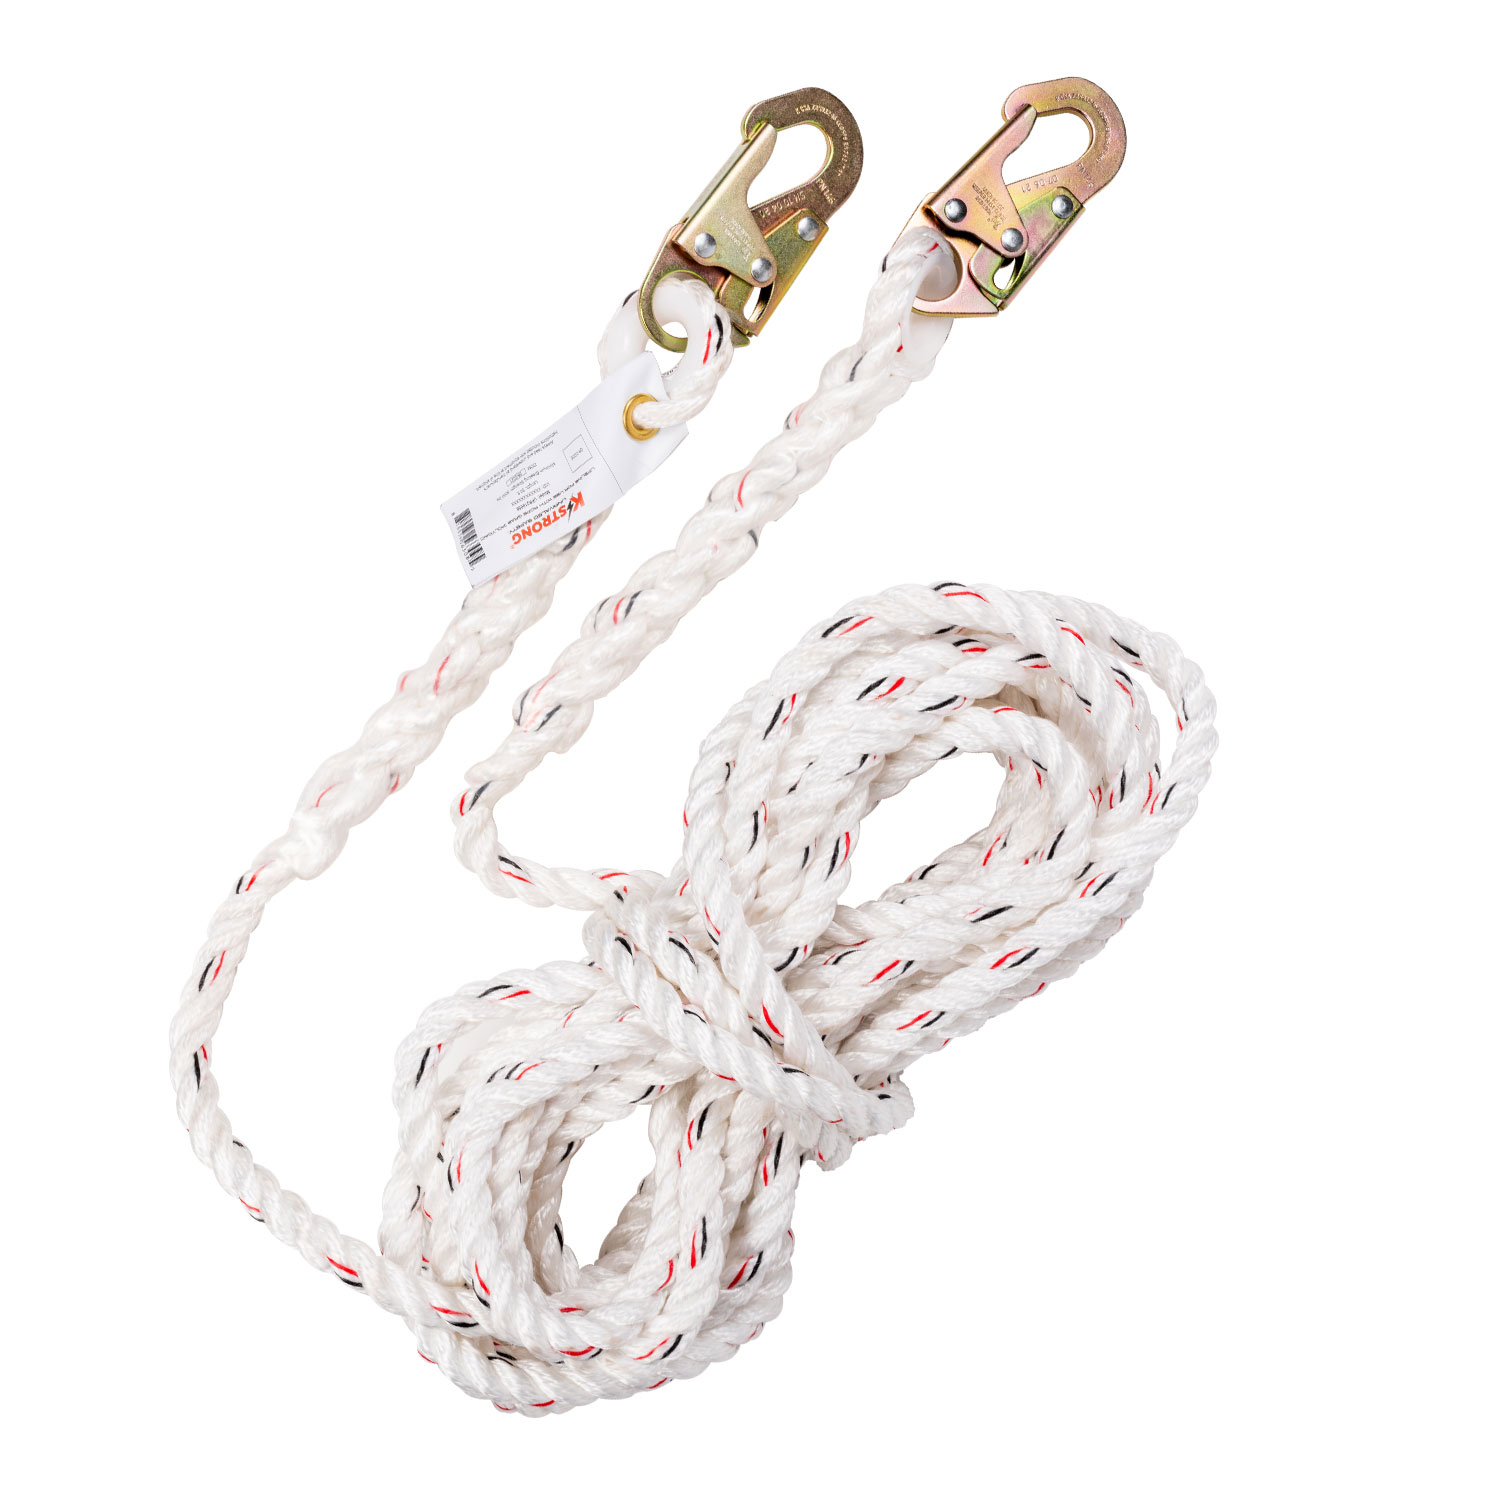 KStrong® 50 ft. Vertical White Polydac Rope Lifeline with Snap Hooks at  Both Ends - KStrong